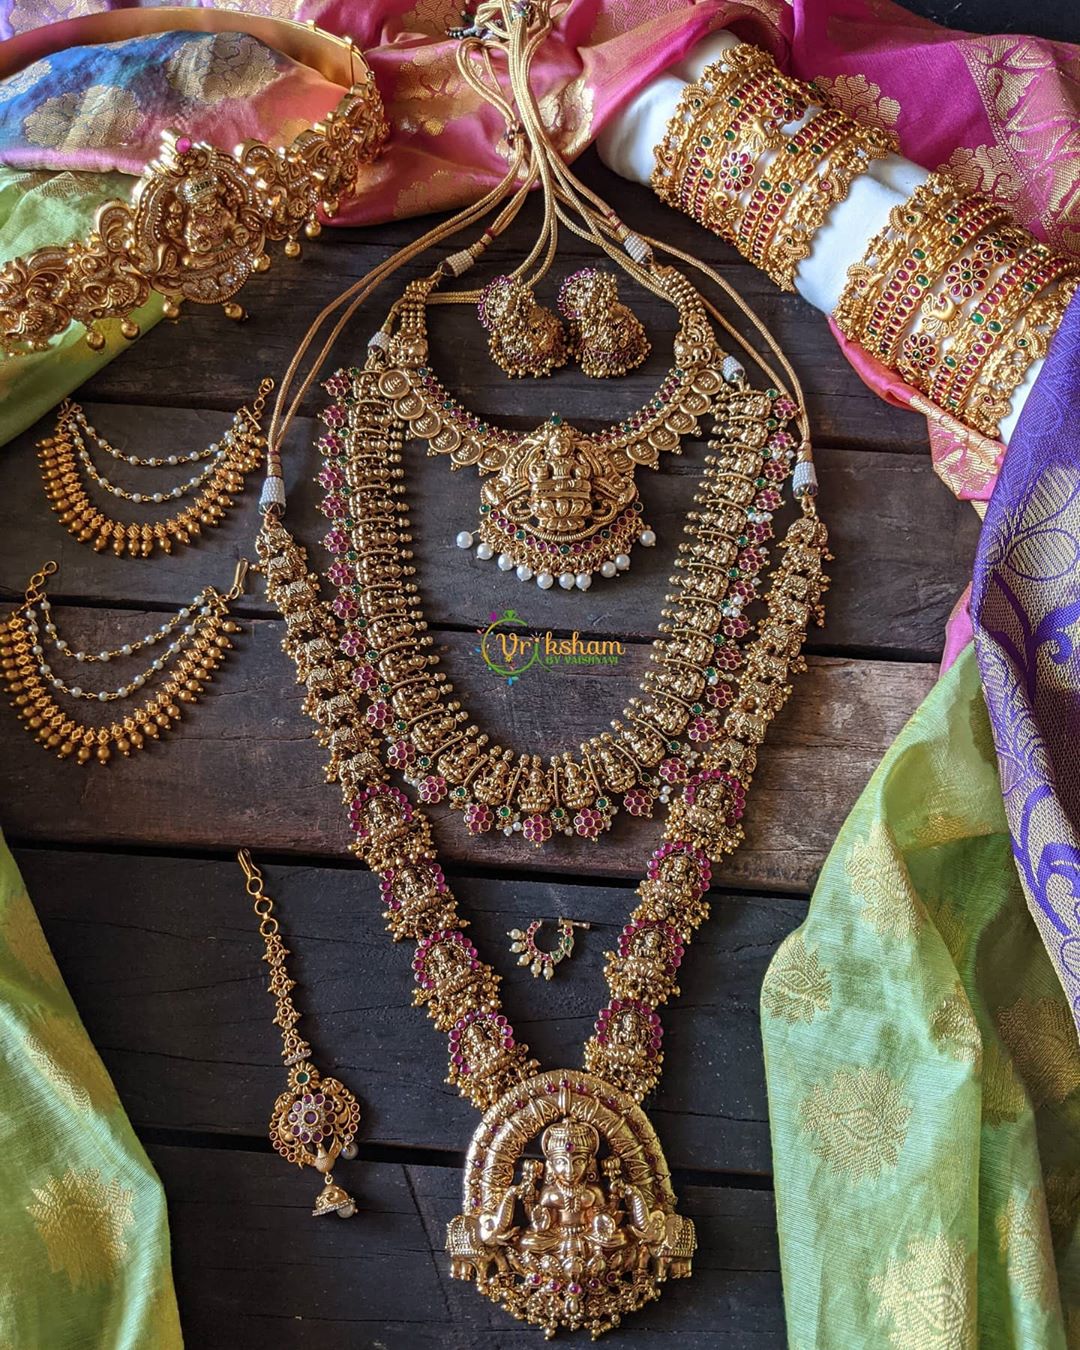 10 must-have jewellery pieces for every Indian bride on her wedding day